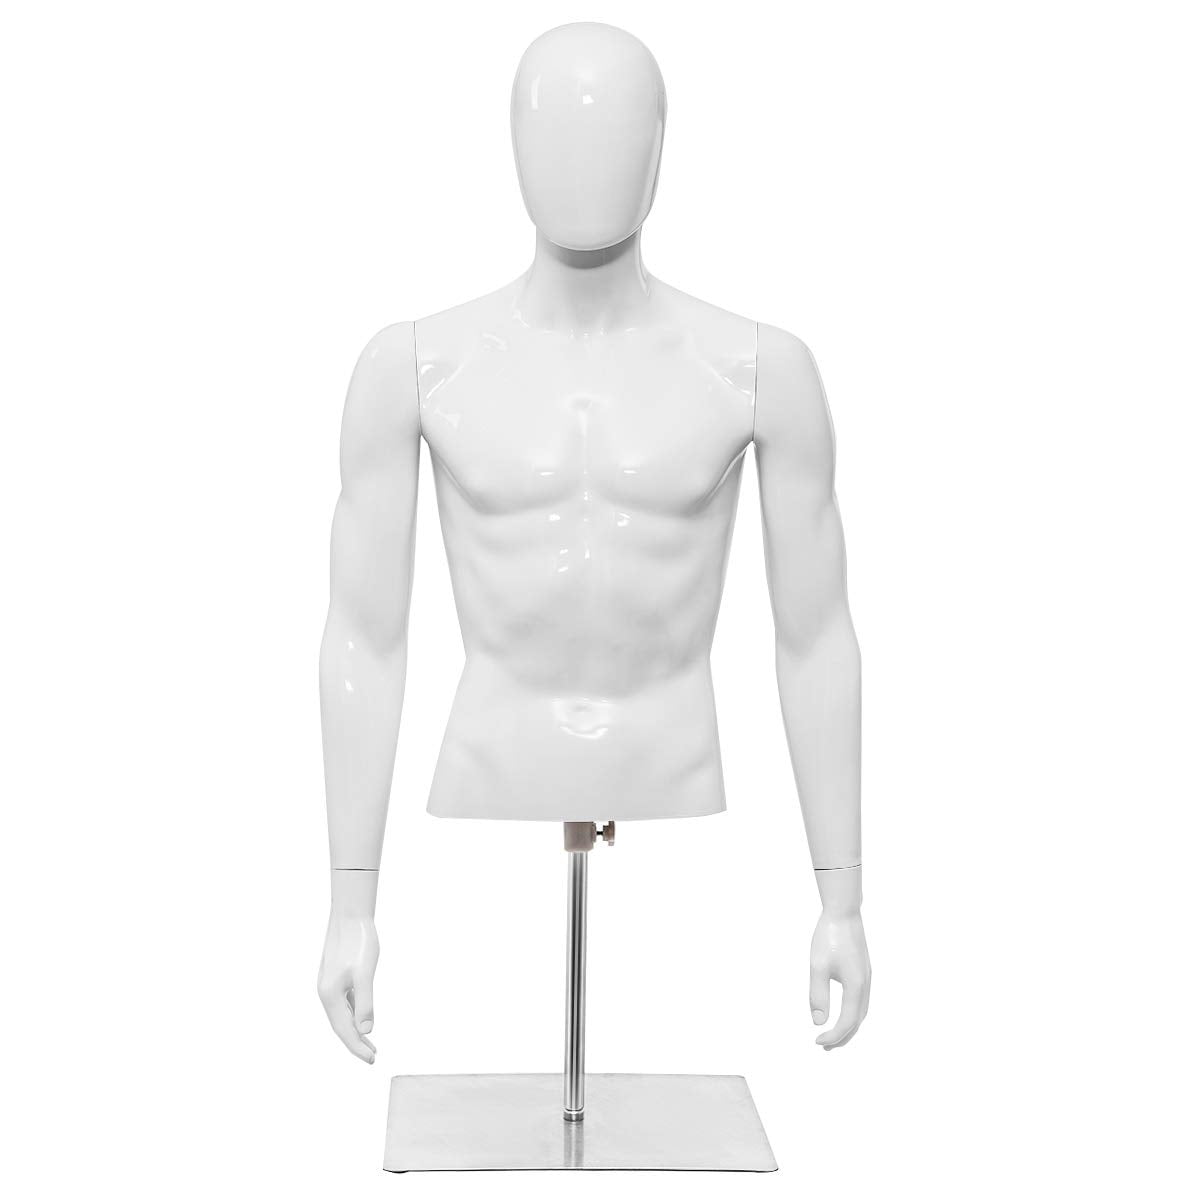 2 REMOVAL HANGERS 1 STAND 2 FREE-STANDING MANNEQUIN MALE & FEMALE TORSOS SET 